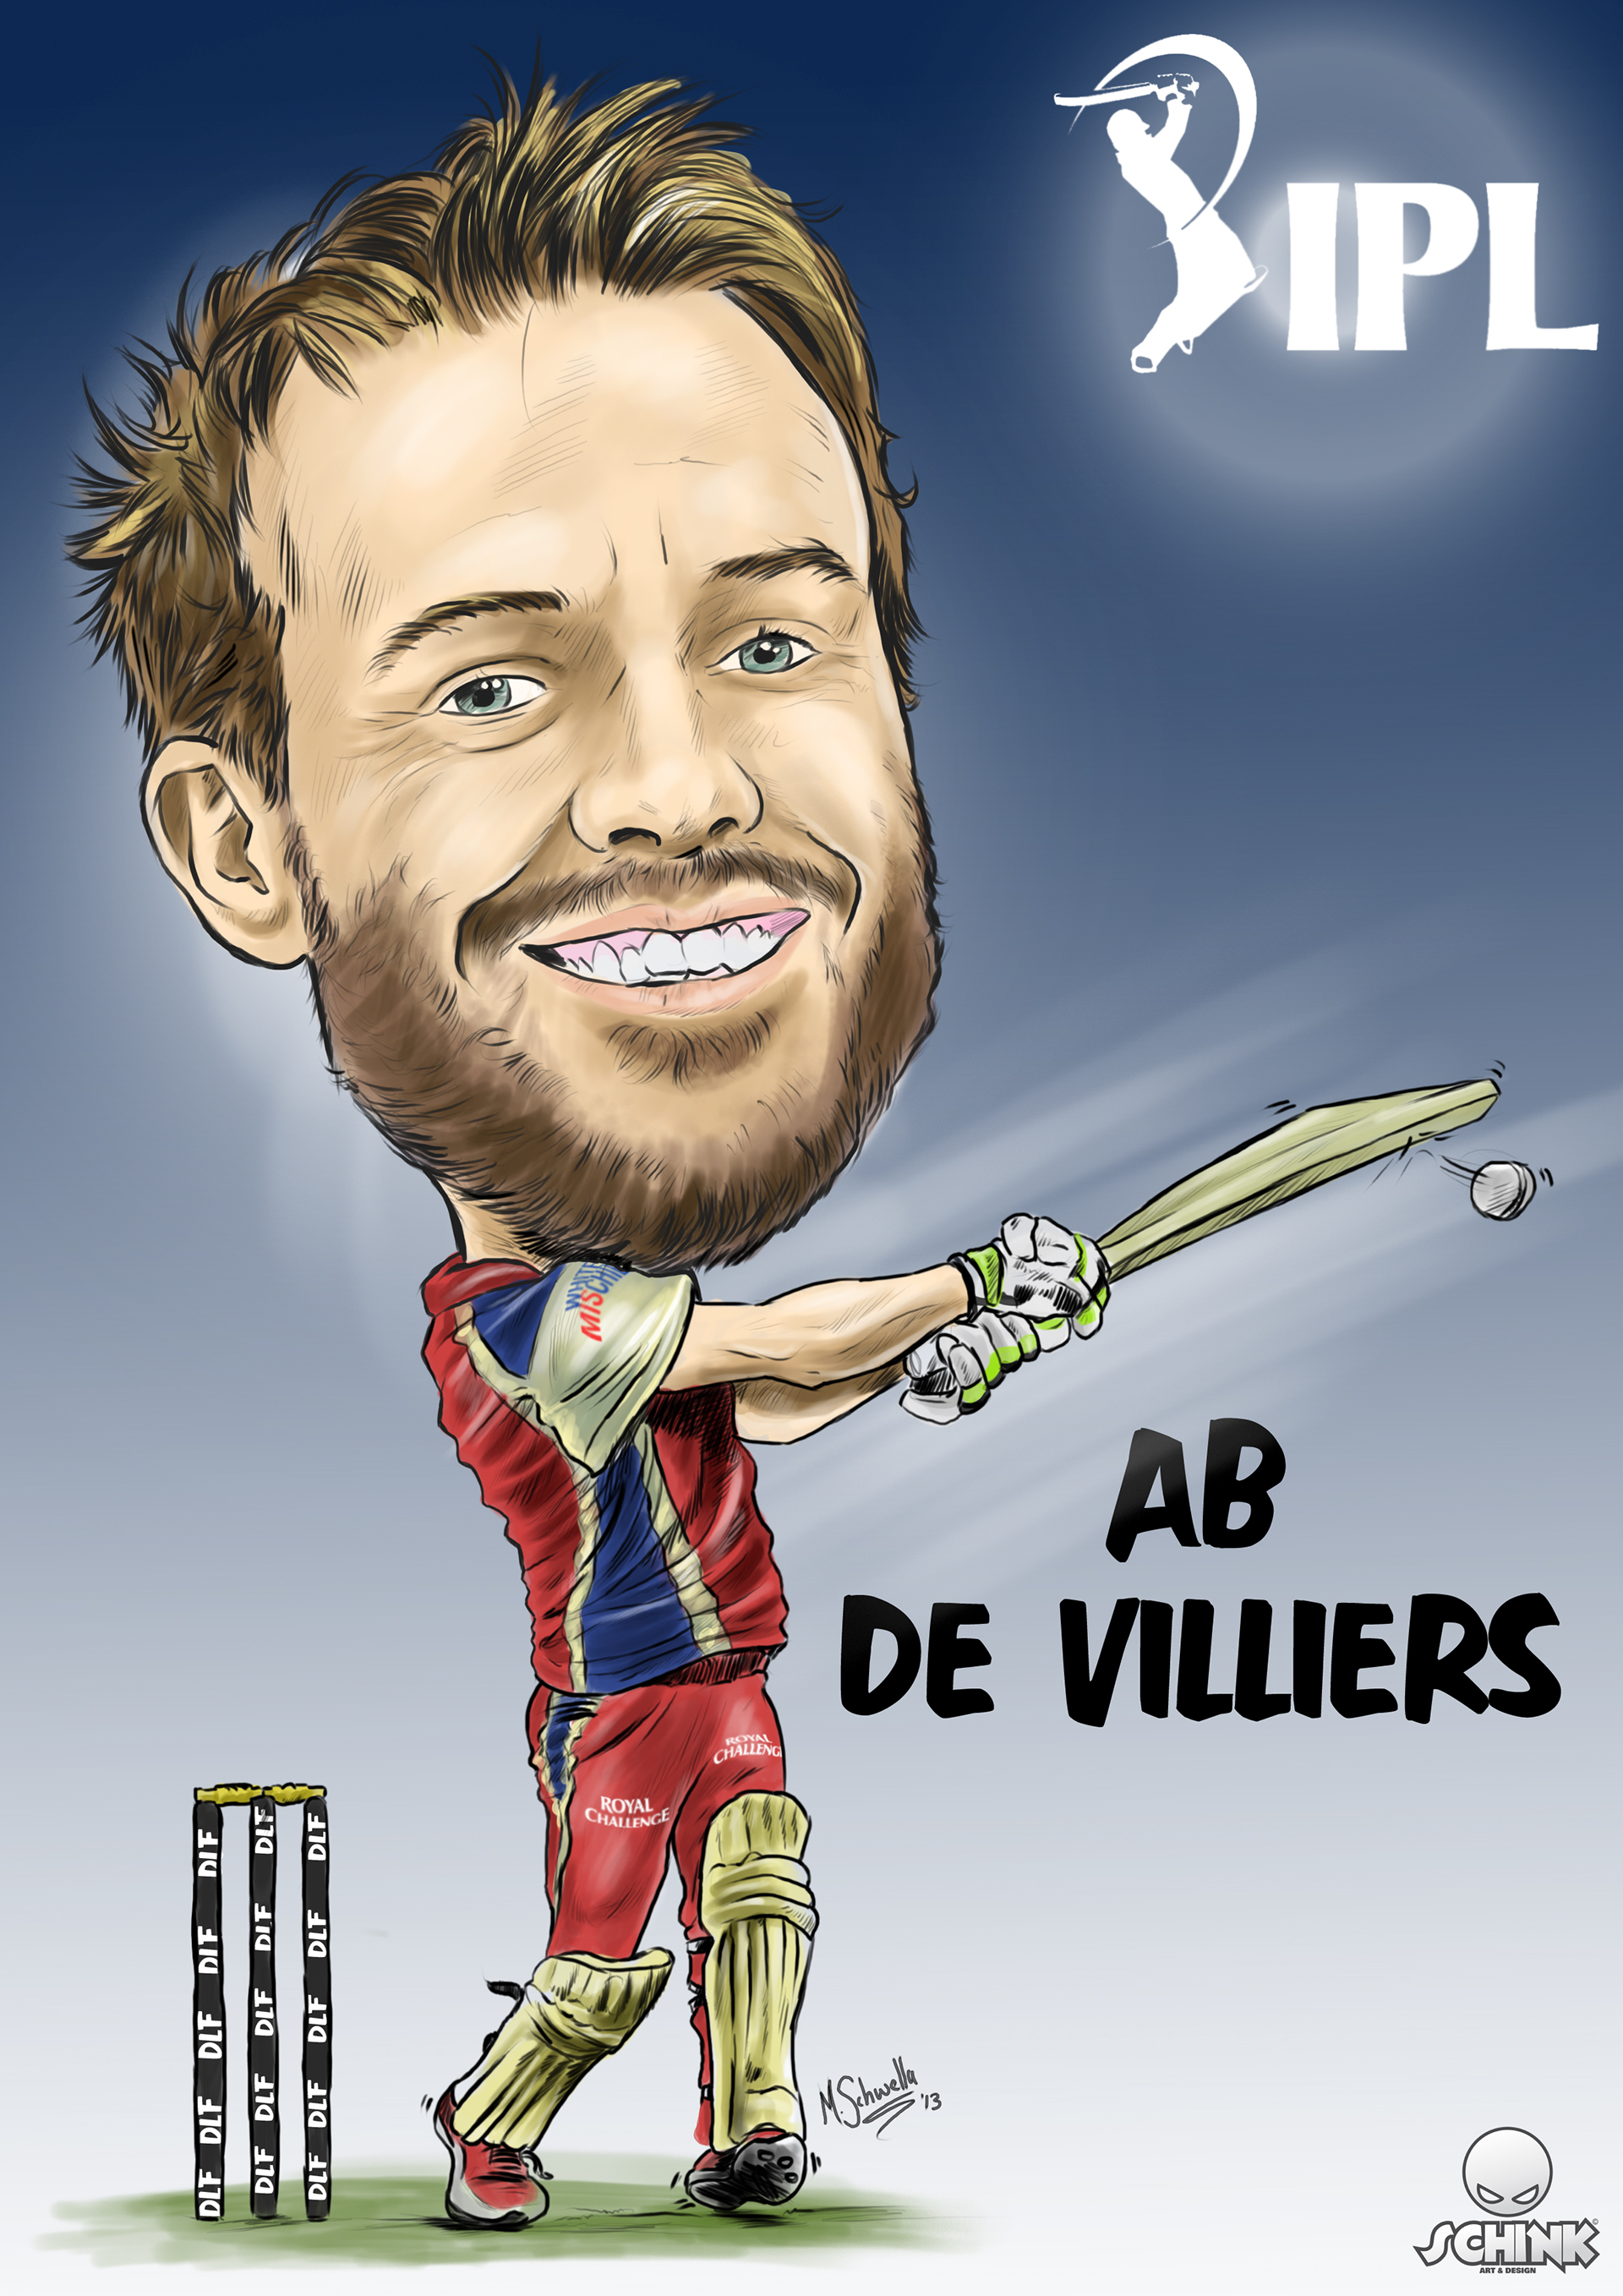 AB Devilliers Mr 360 Player Poster Paper Print - Sports posters in India -  Buy art, film, design, movie, music, nature and educational  paintings/wallpapers at Flipkart.com